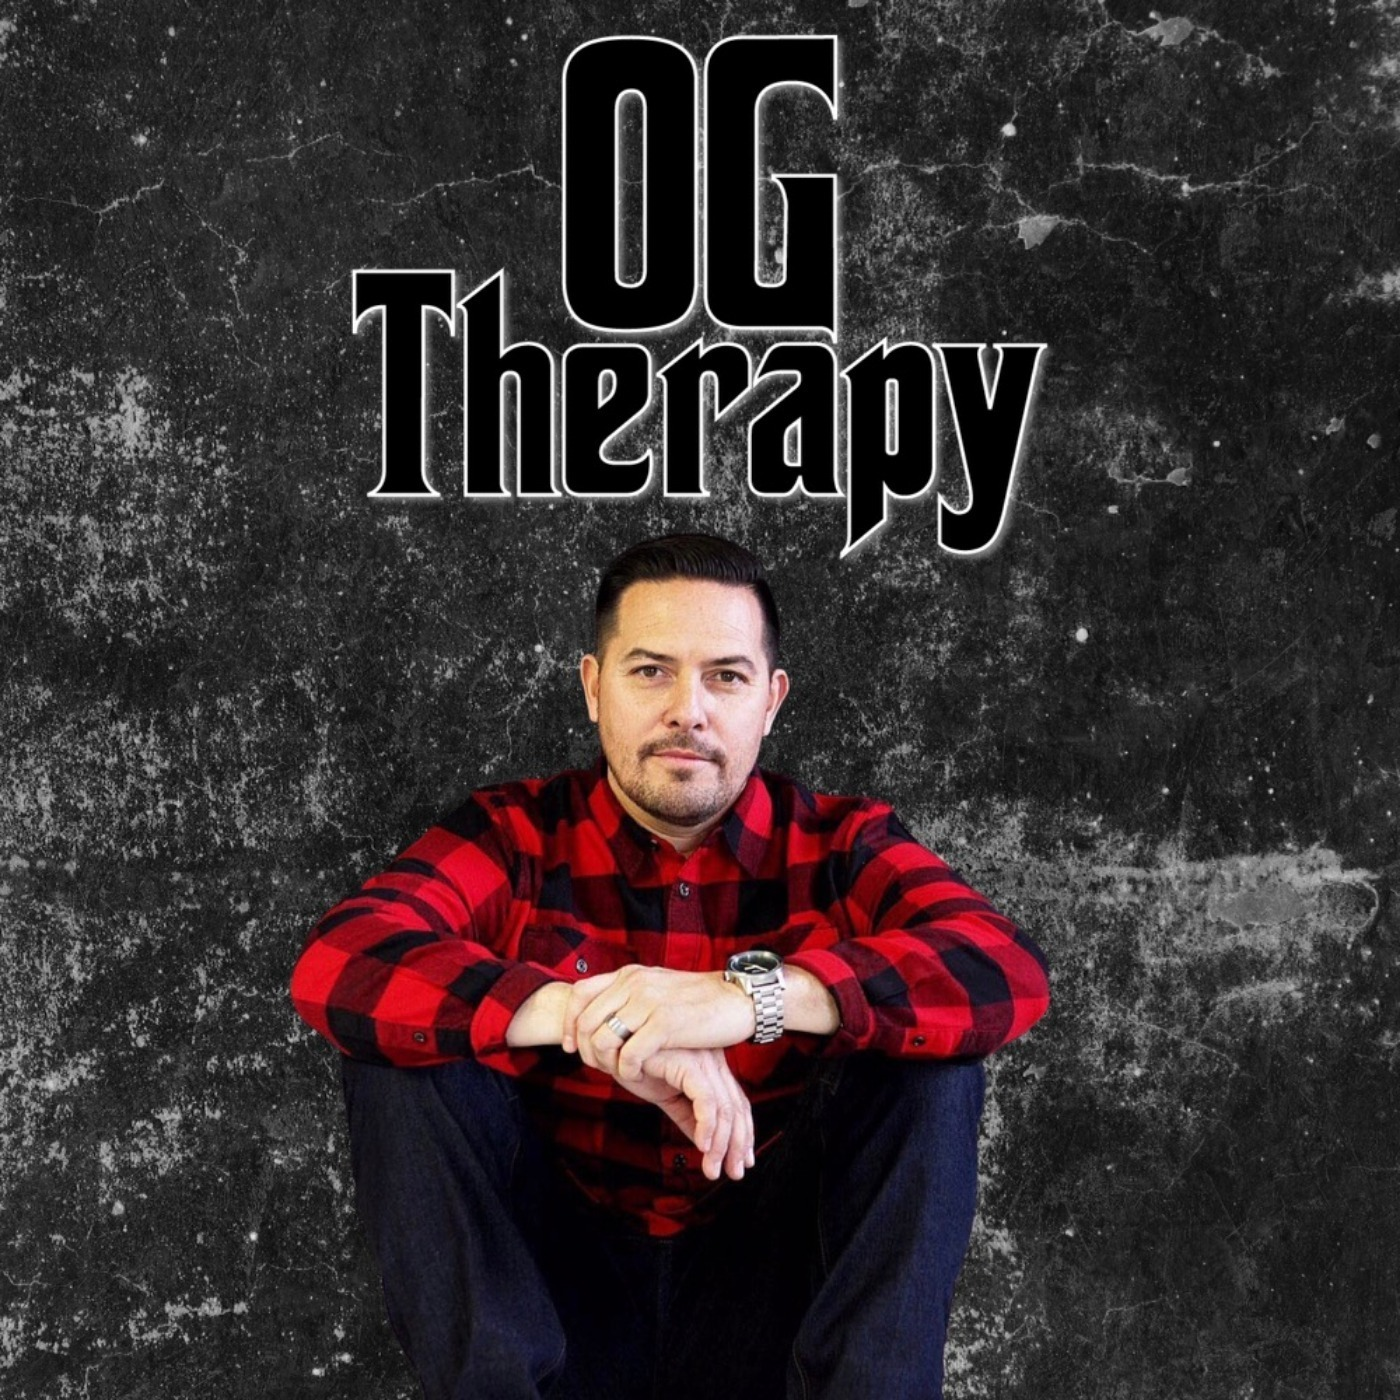 OG Therapy Podcast